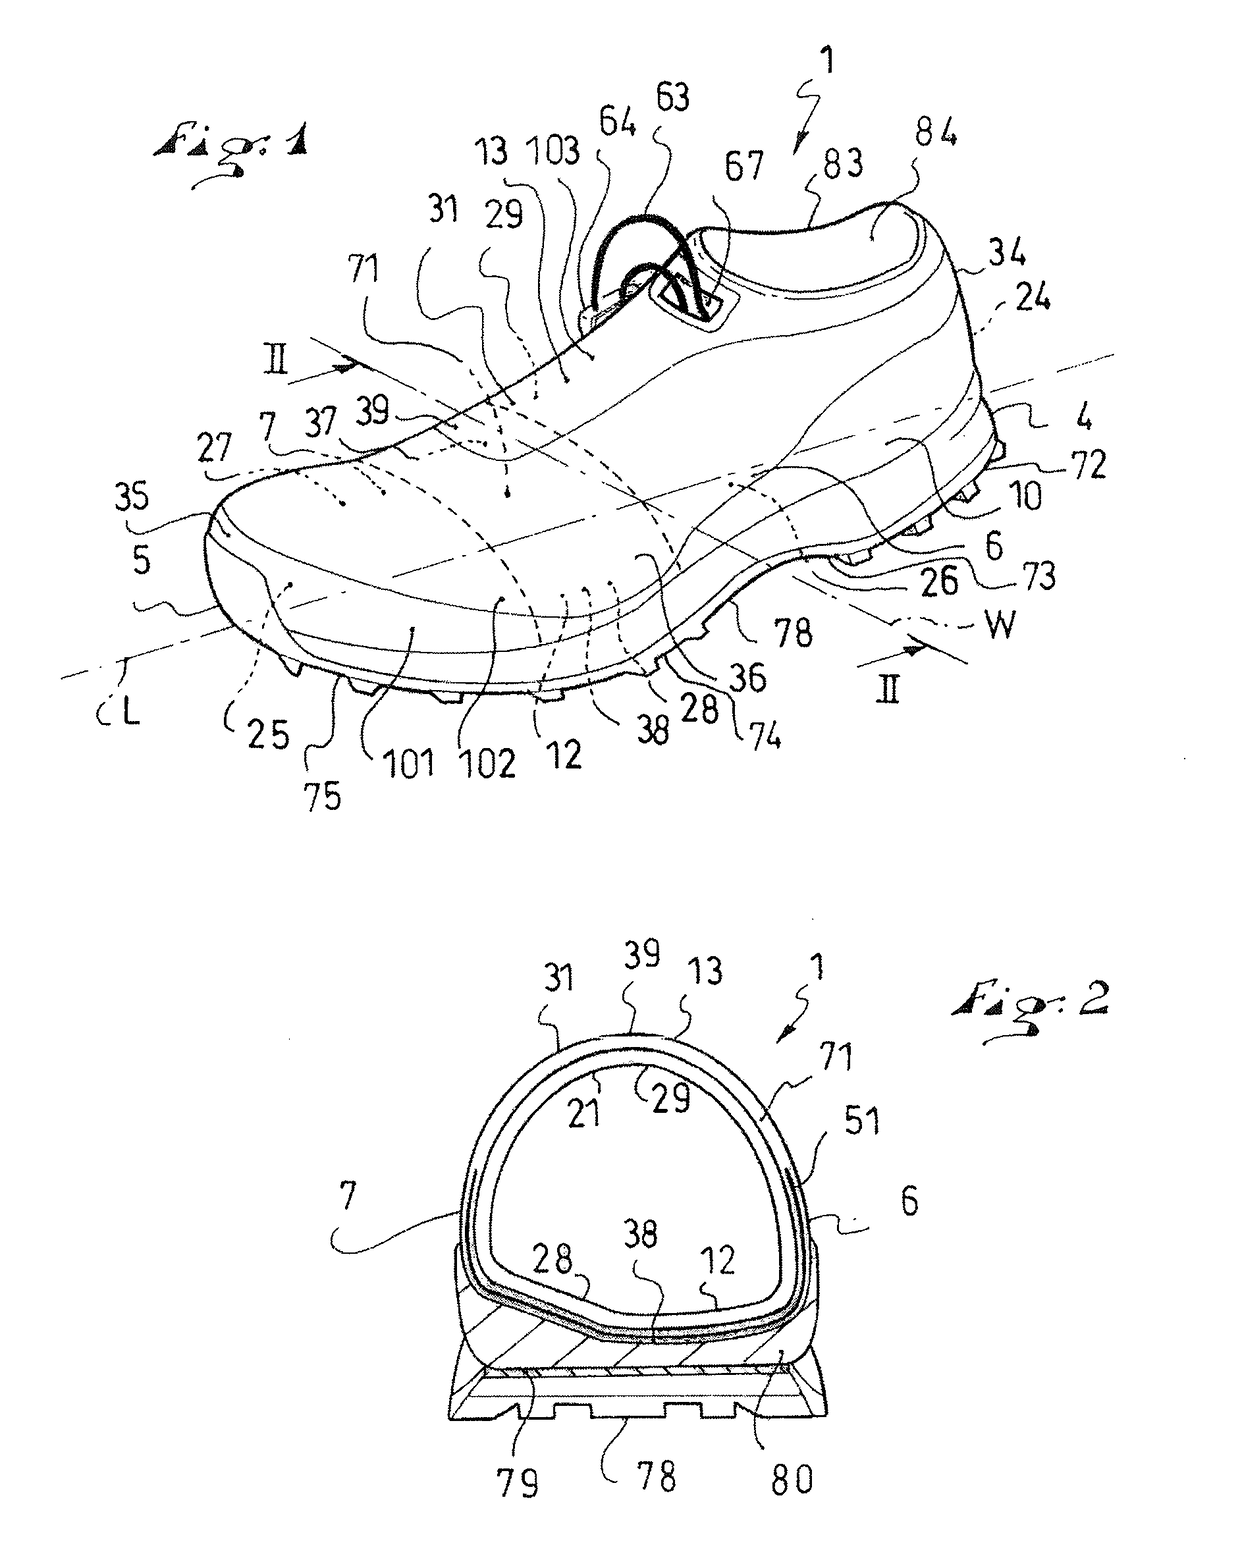 Article of footwear with improved structure